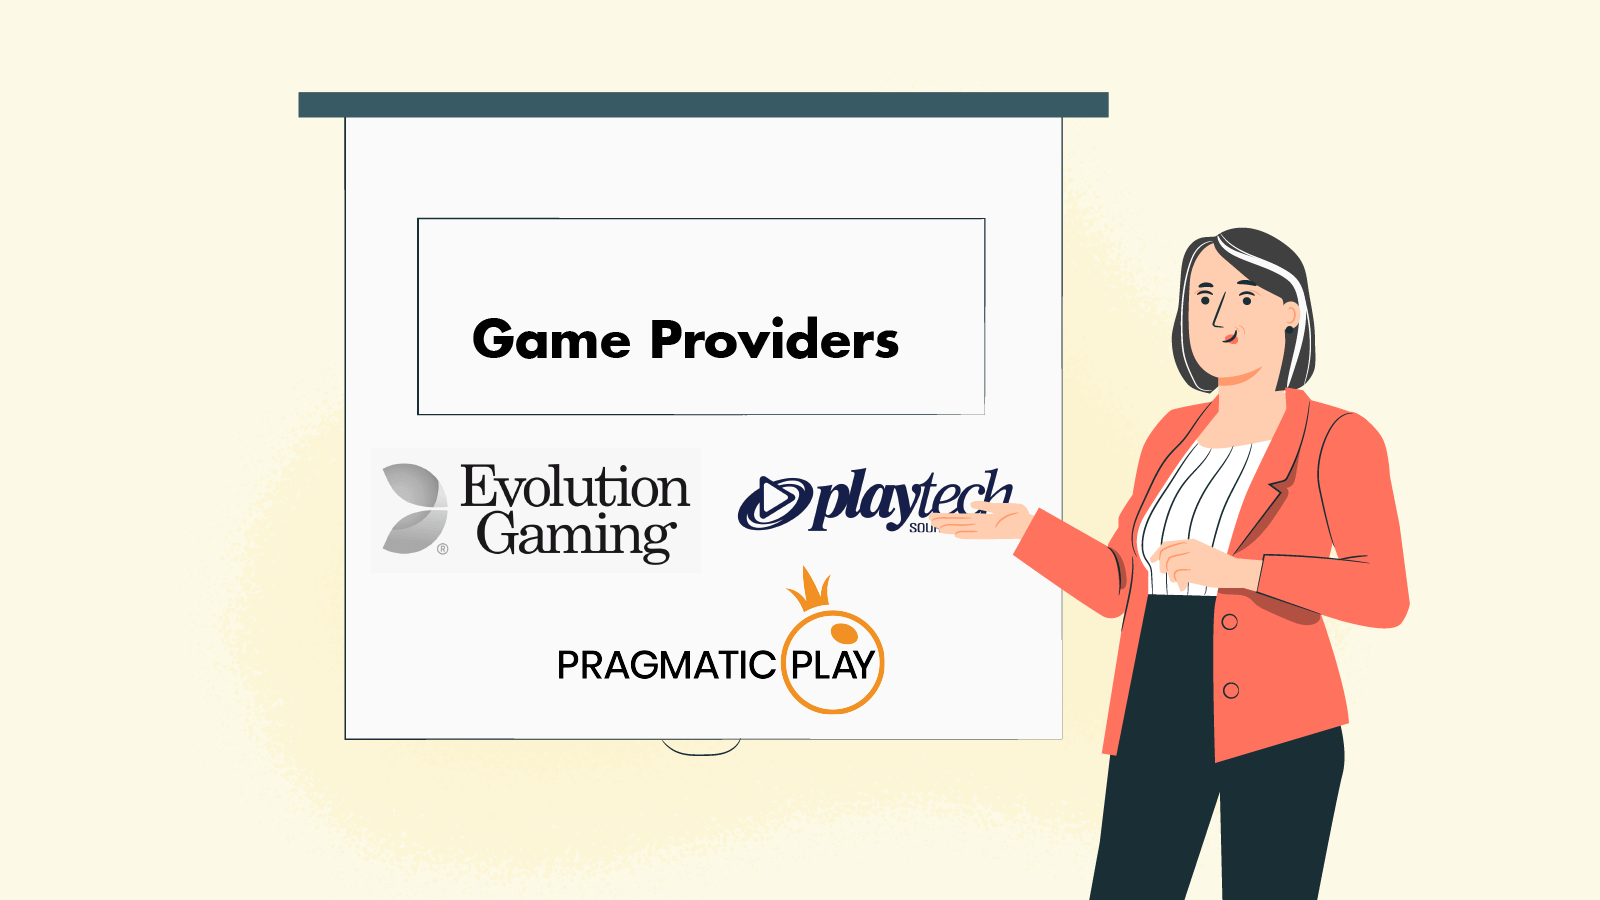 What live game providers we’ve seen